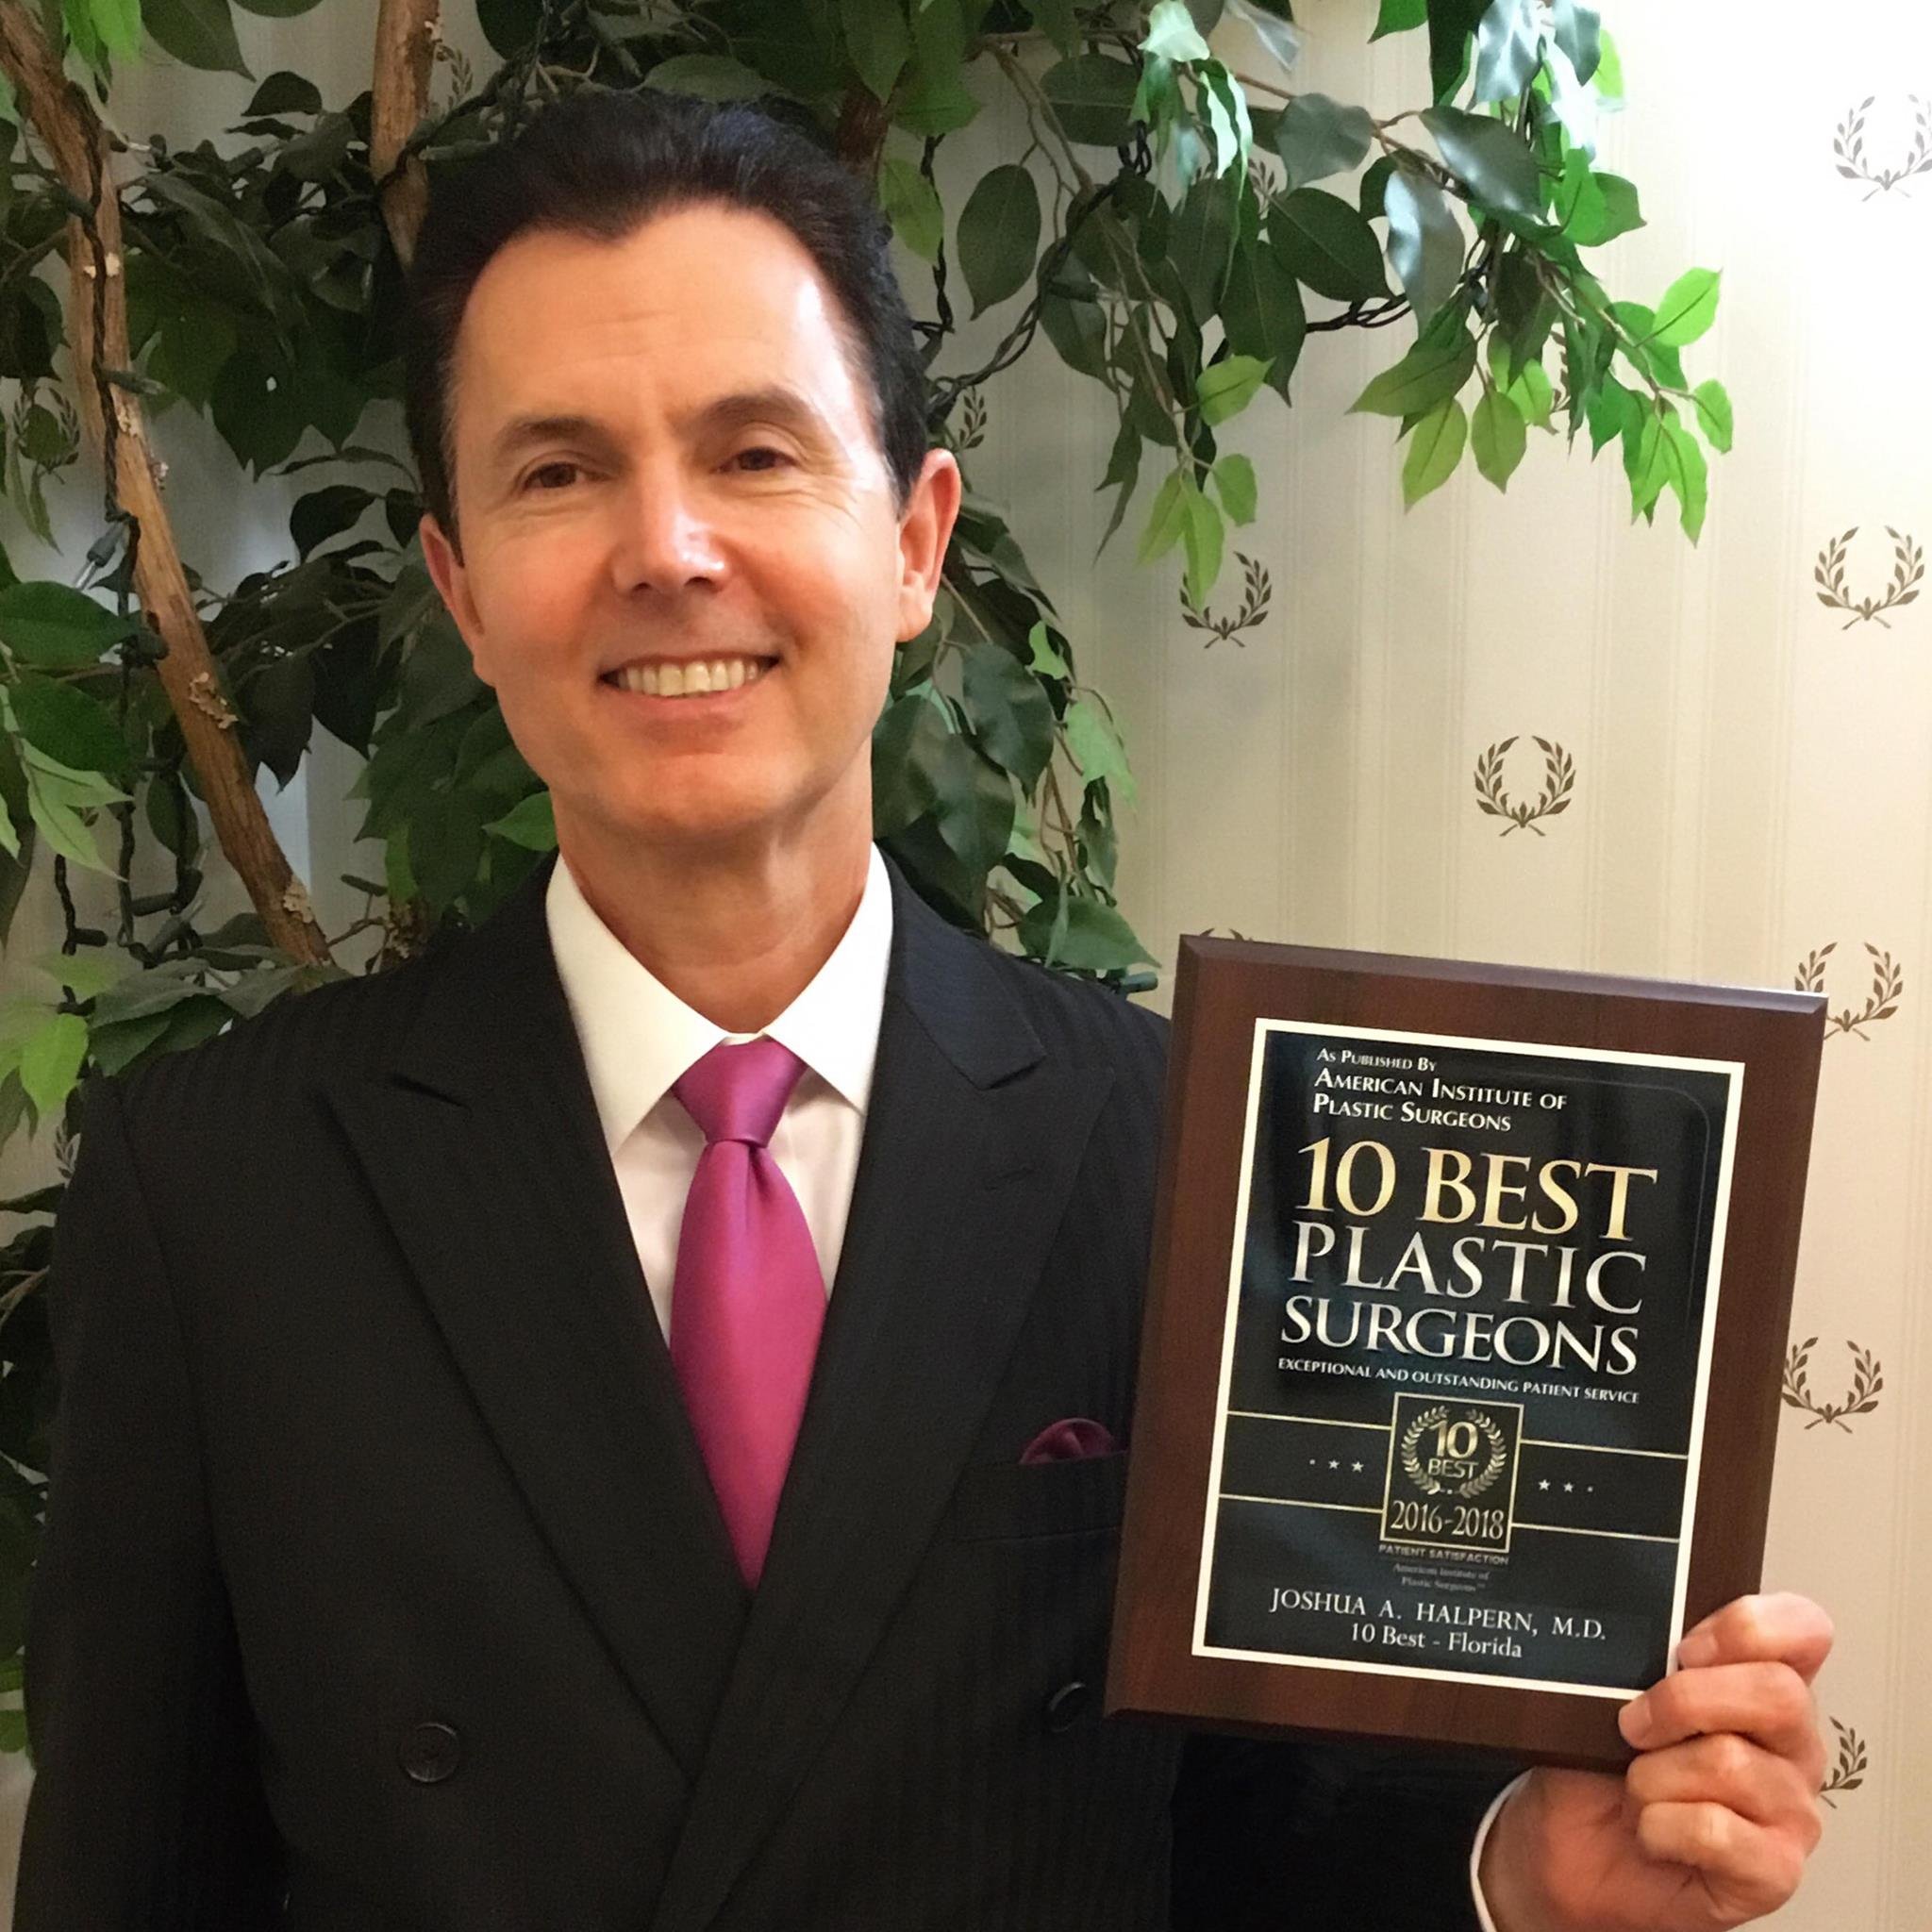 Dr. Joshua Halpern, MD, PA is a highly regarded plastic surgeon that has helped thousands of patients from around the world look and feel their best.